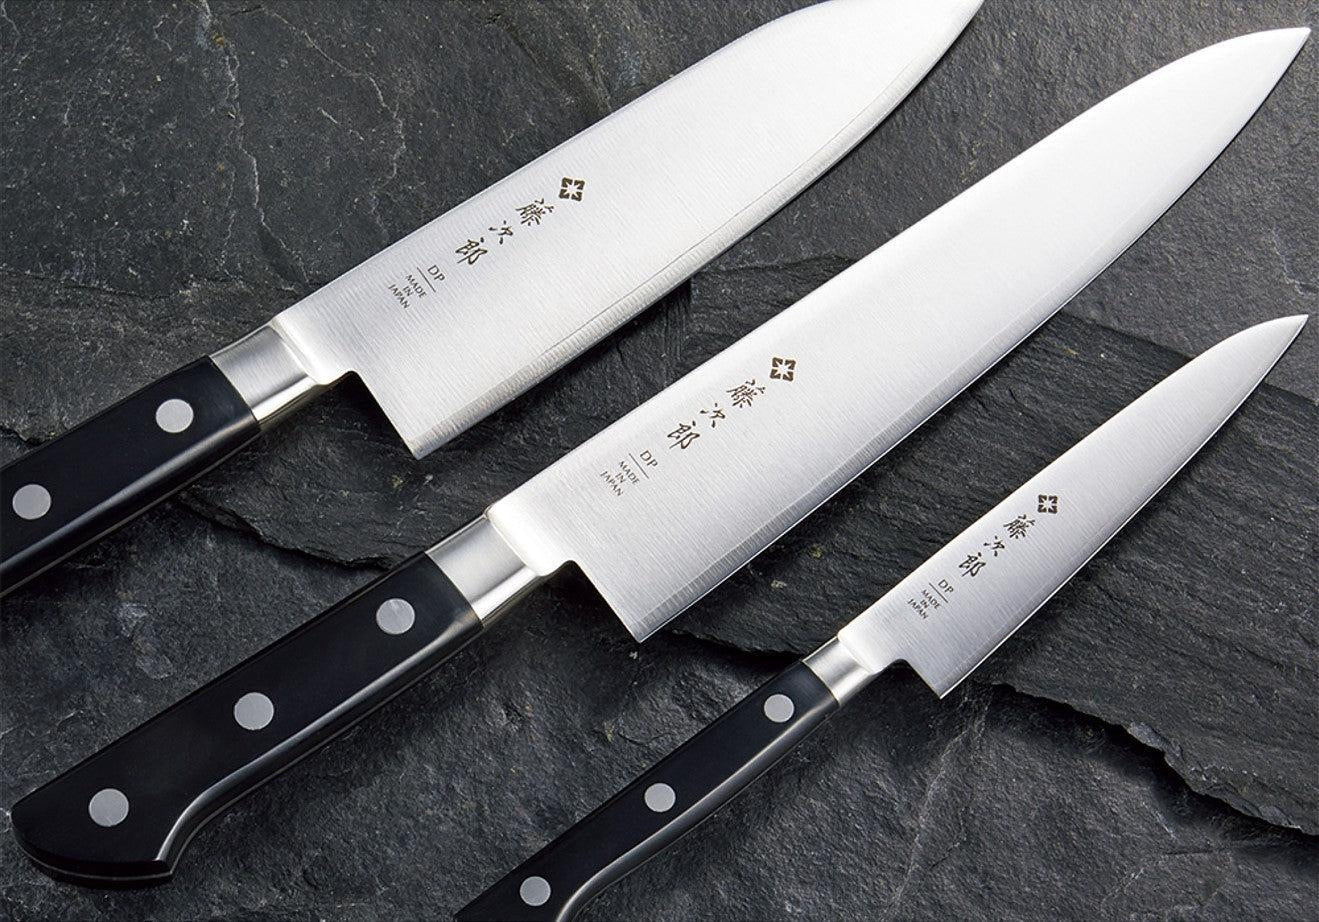 http://int.japanesetaste.com/cdn/shop/articles/tojiro-tojiro-pro-and-fujitora-whats-the-difference-between-these-japanese-knife-brands.jpg?v=1685798766&width=5760